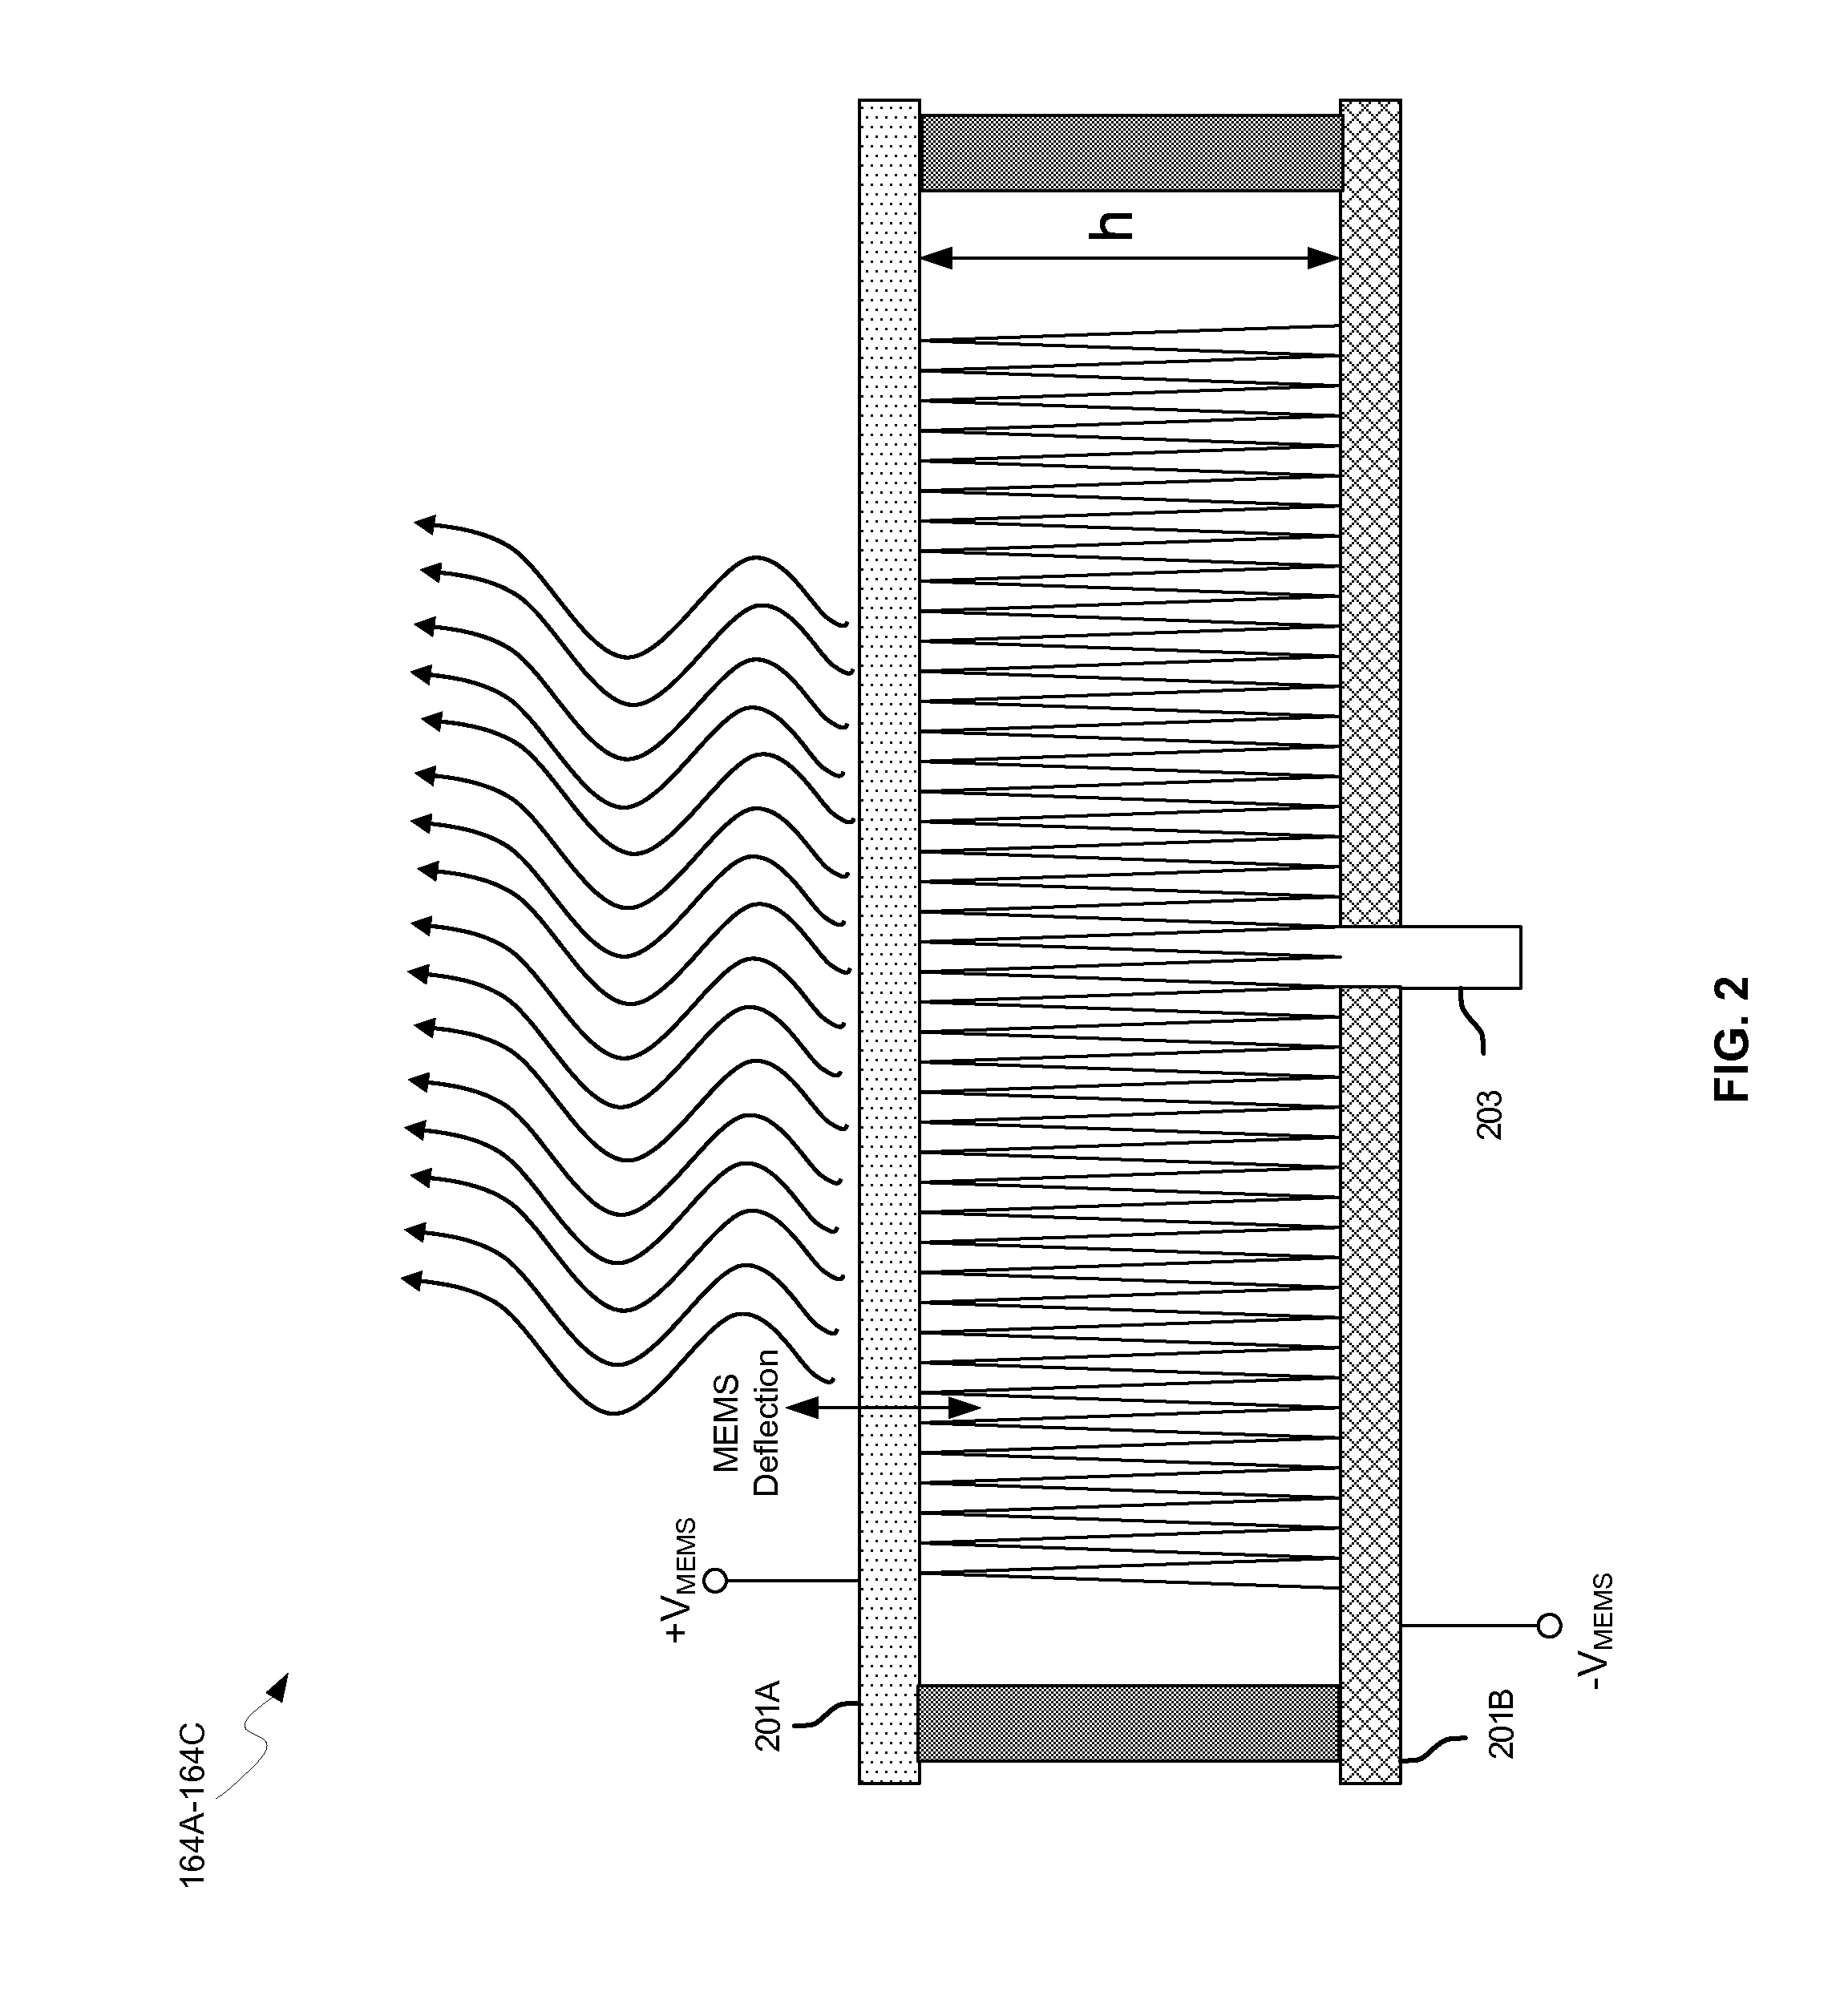 Method and system for a distributed leaky wave antenna